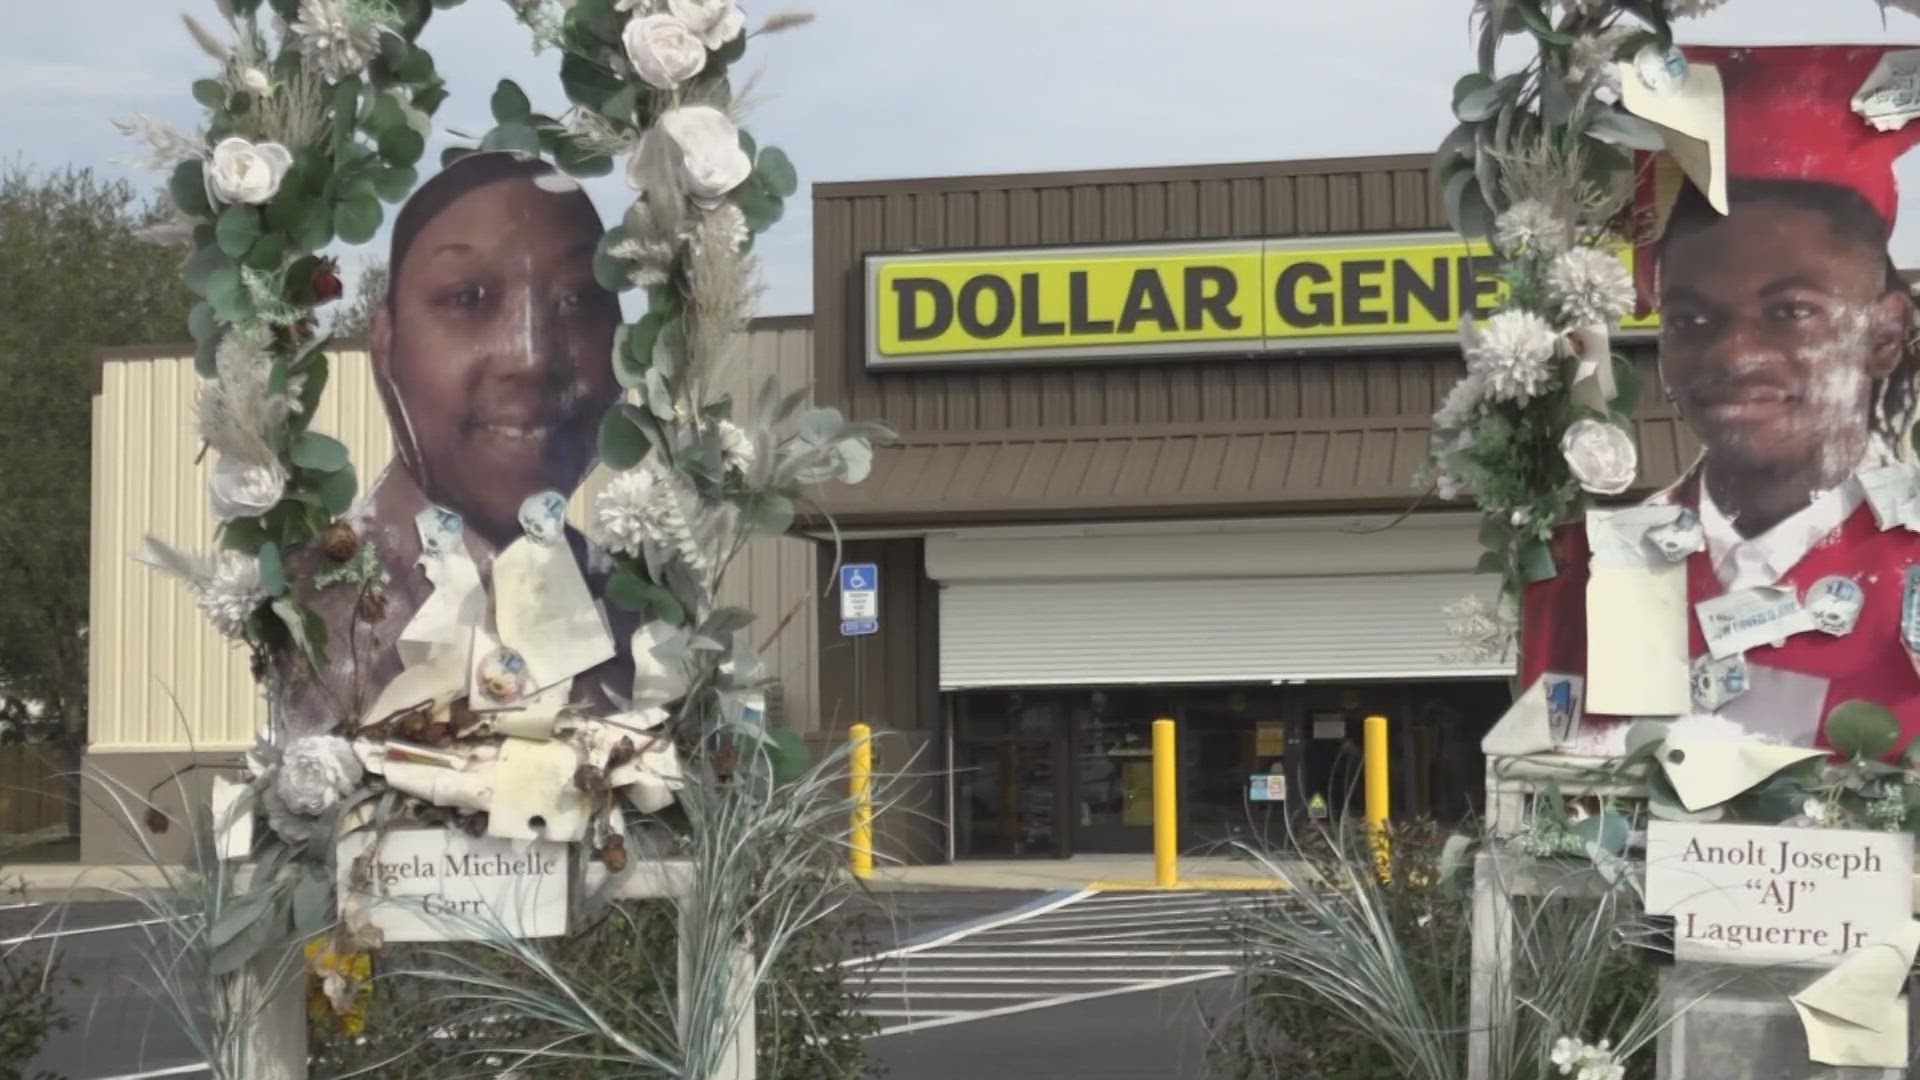 It’s been over four months since an Orange Park man killed A.J. Laguerre Jr., Angela Carr and Jerrald Gallion at the store on Kings Rd. in Jacksonville.